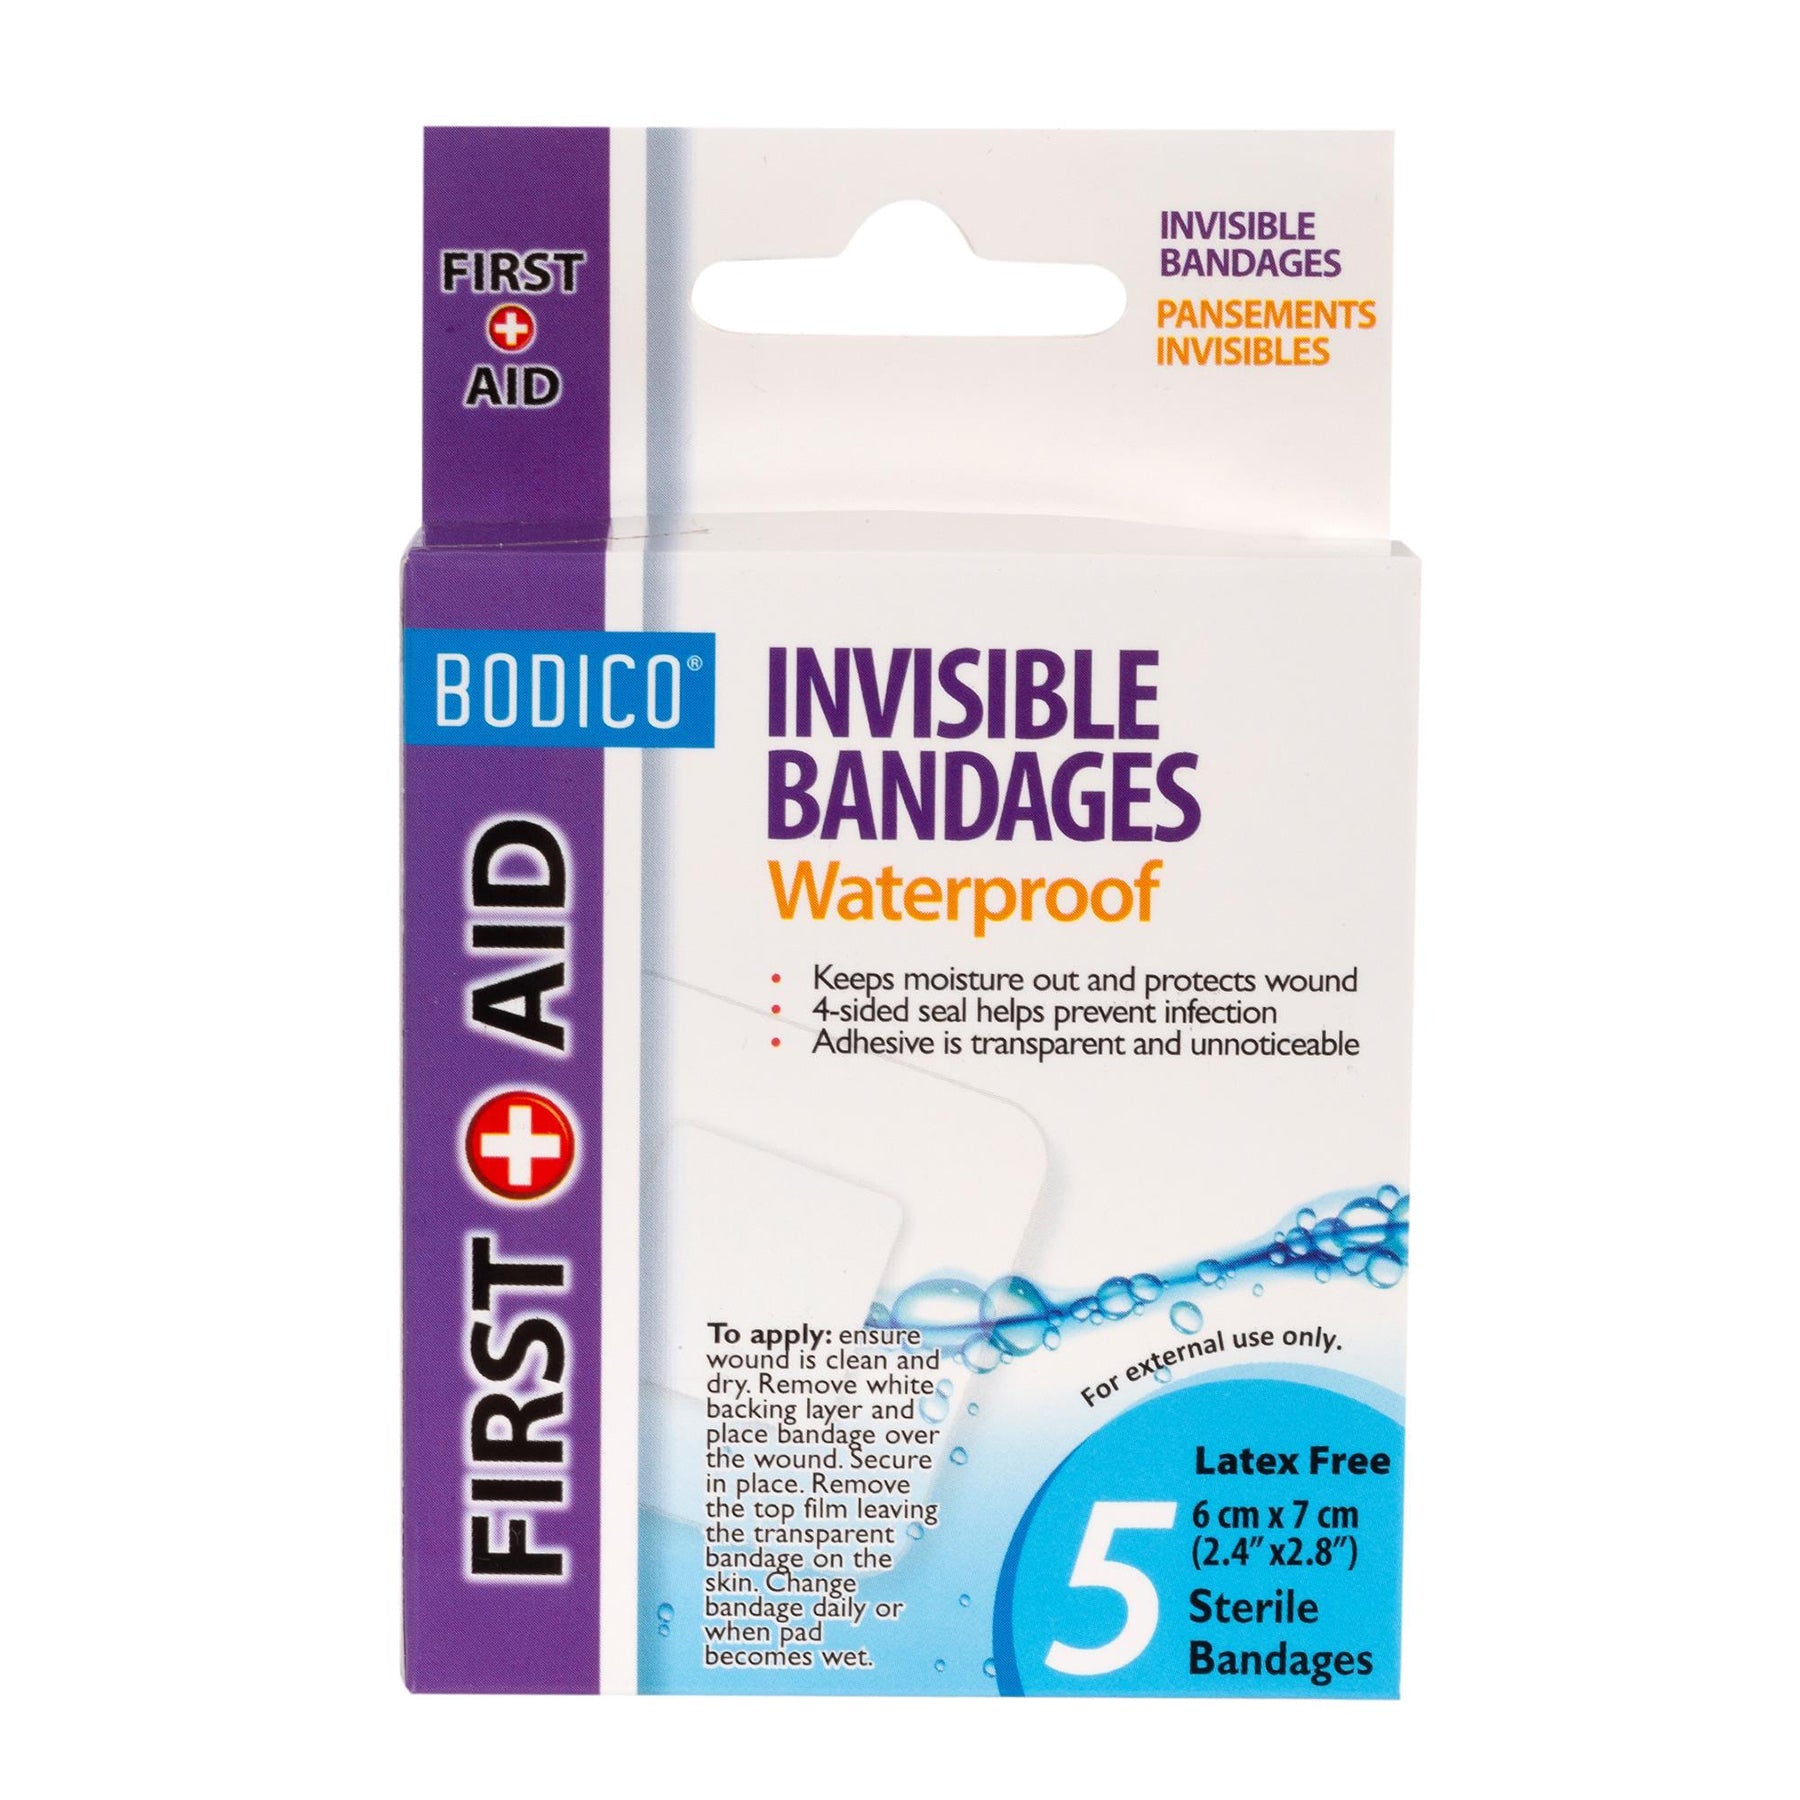 Bodico 5 Invisible Bandages Latex Free 2.4x2.8in each